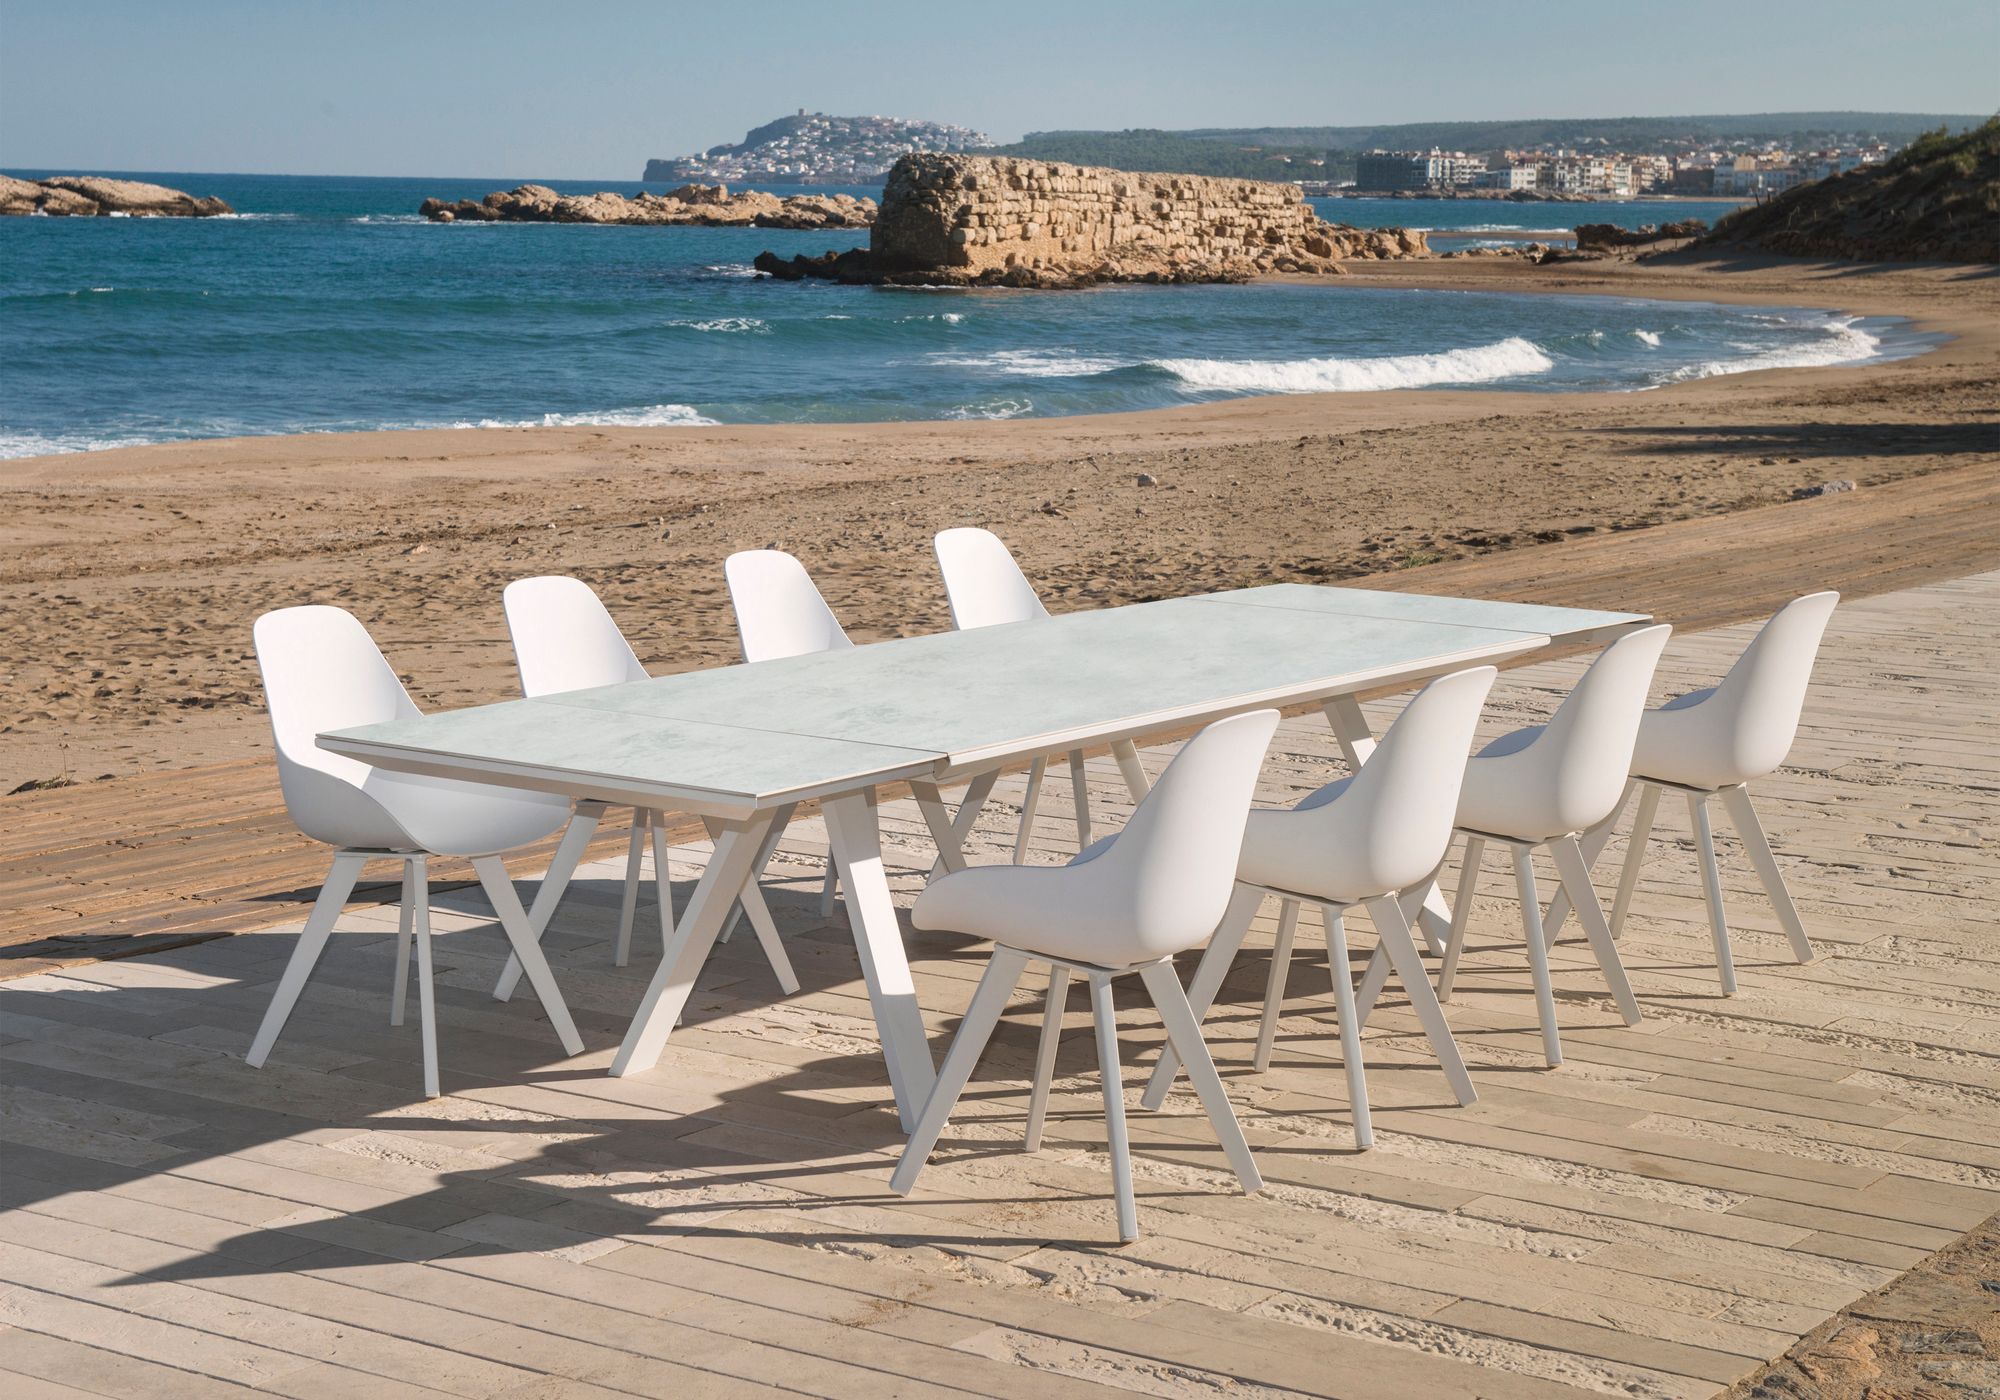 Remarkable Outdoor Living: Neverland Outdoor Ceramic Extension Dining Table. A modern outdoor dining setting with a long table and chairs on a wooden boardwalk by the beach, overlooking the sea and coastline in the distance.